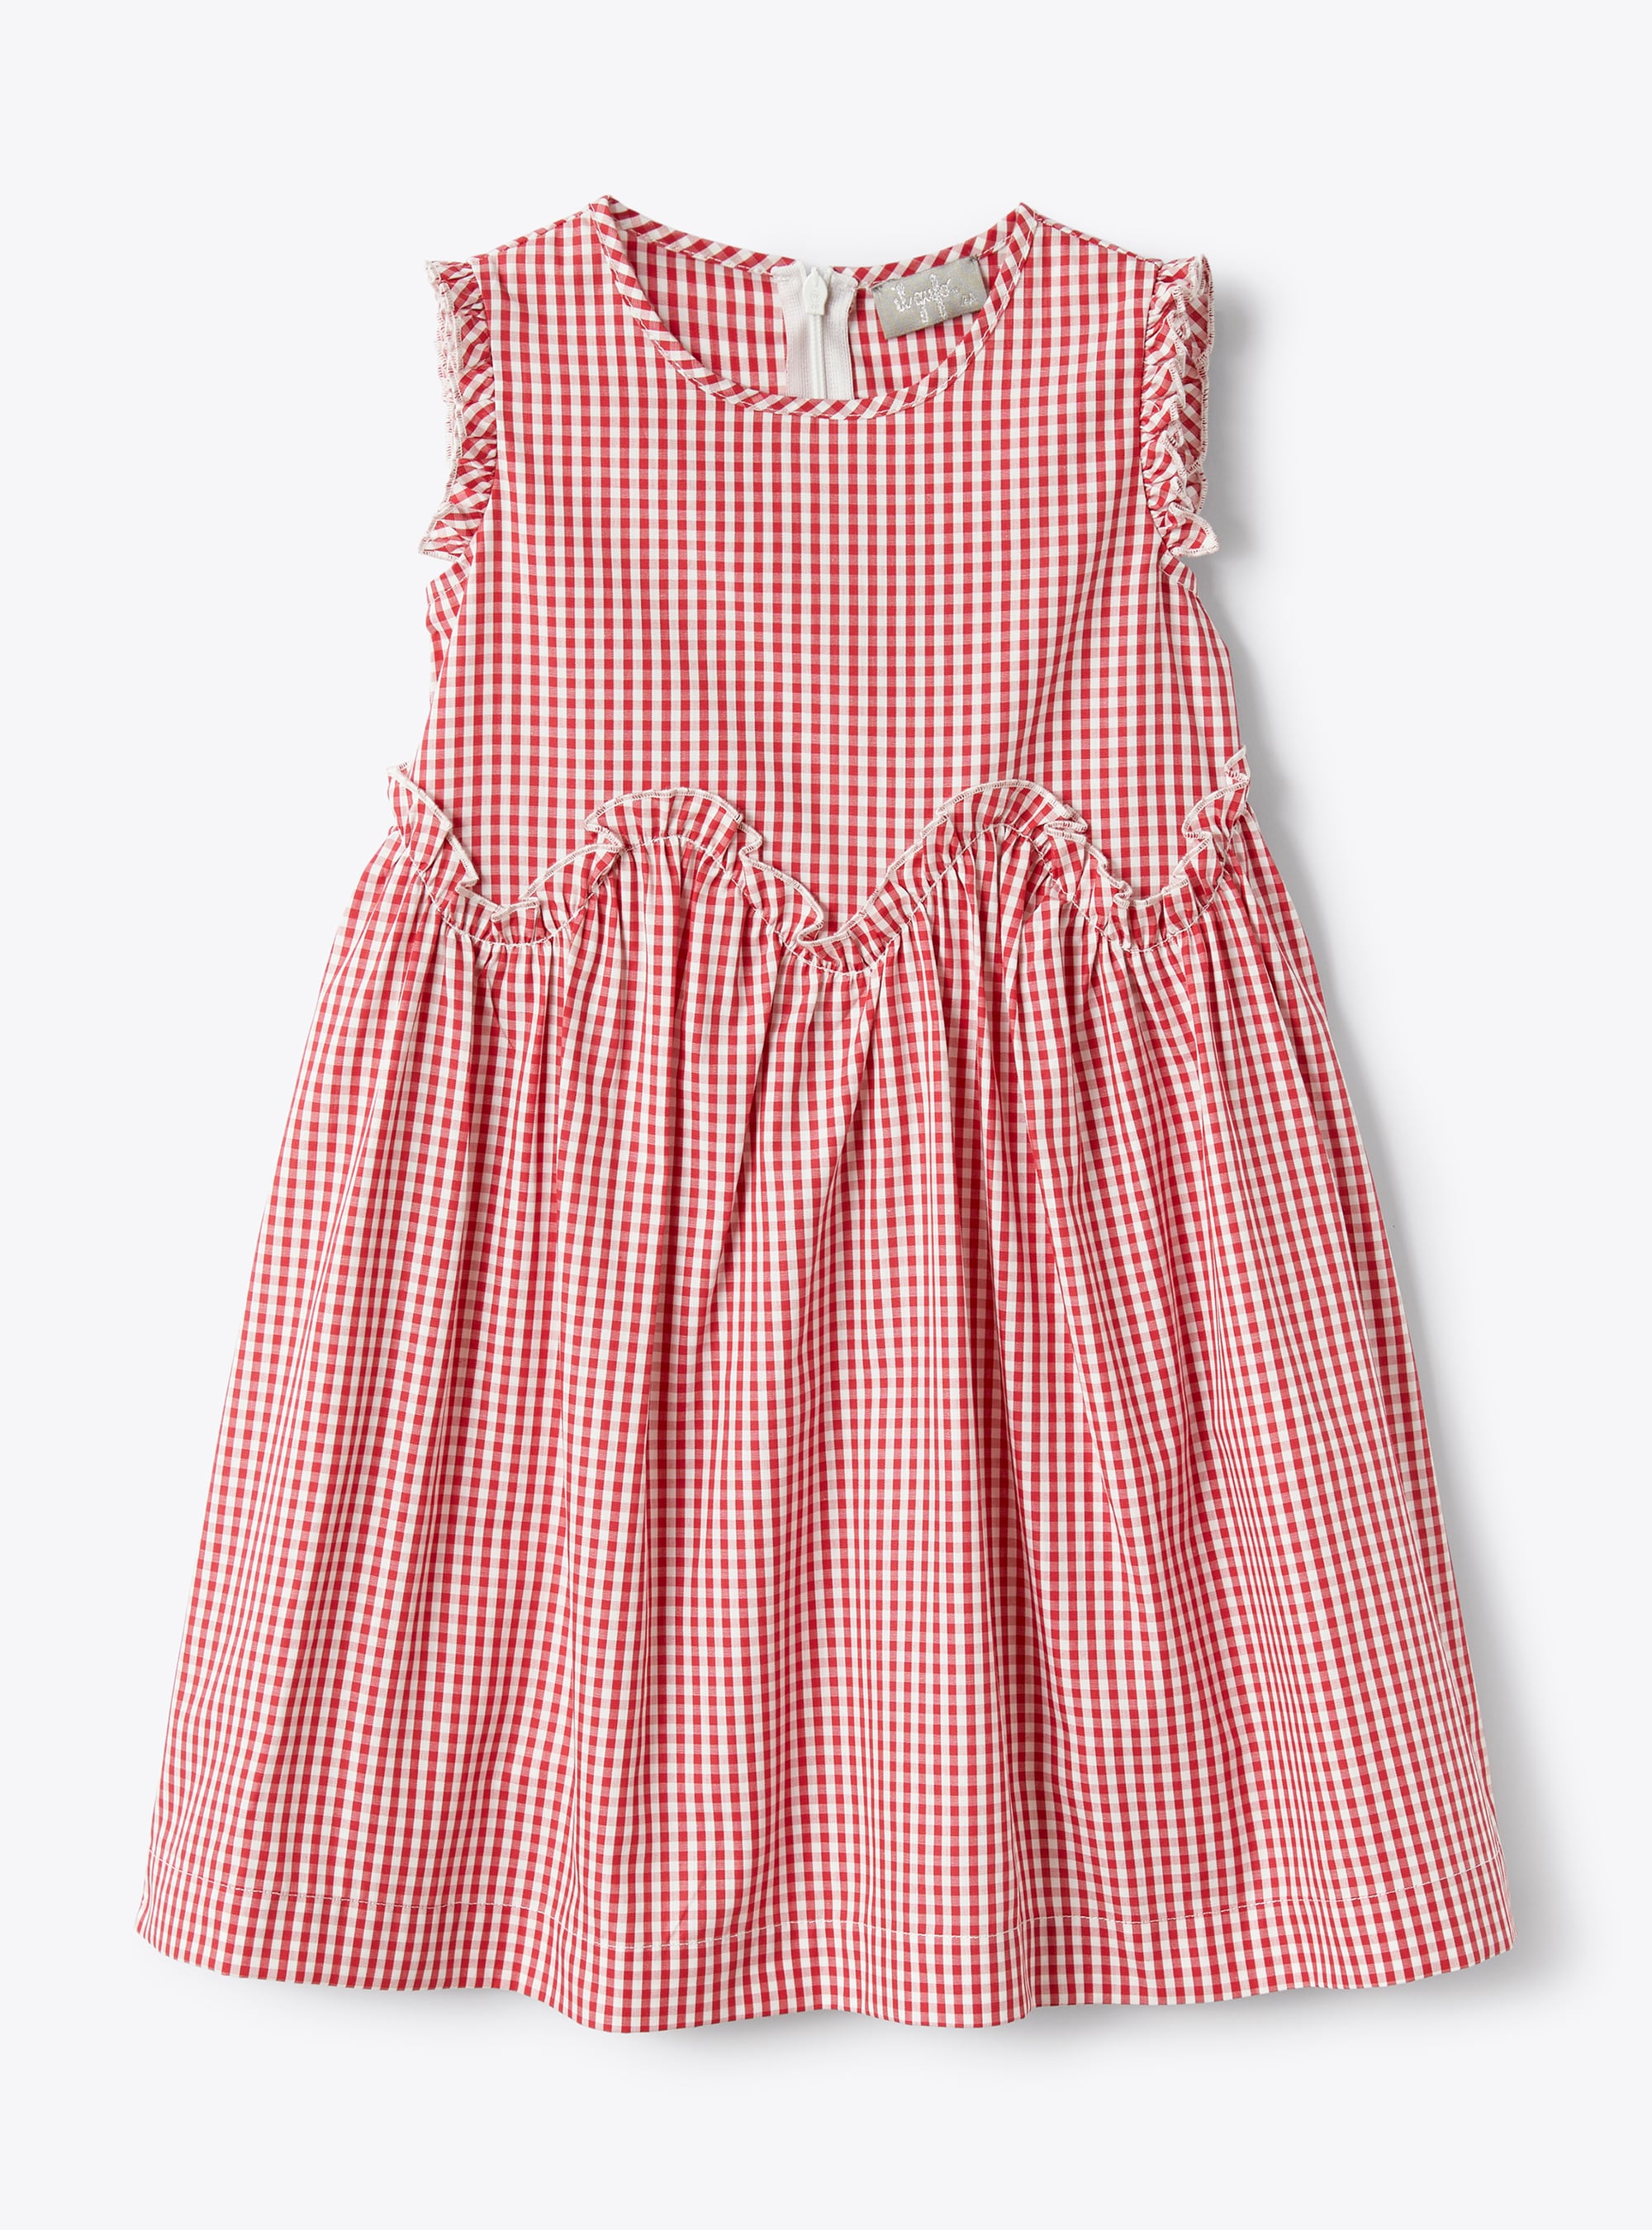 Sleeveless dress in a gingham-check pattern | Il Gufo